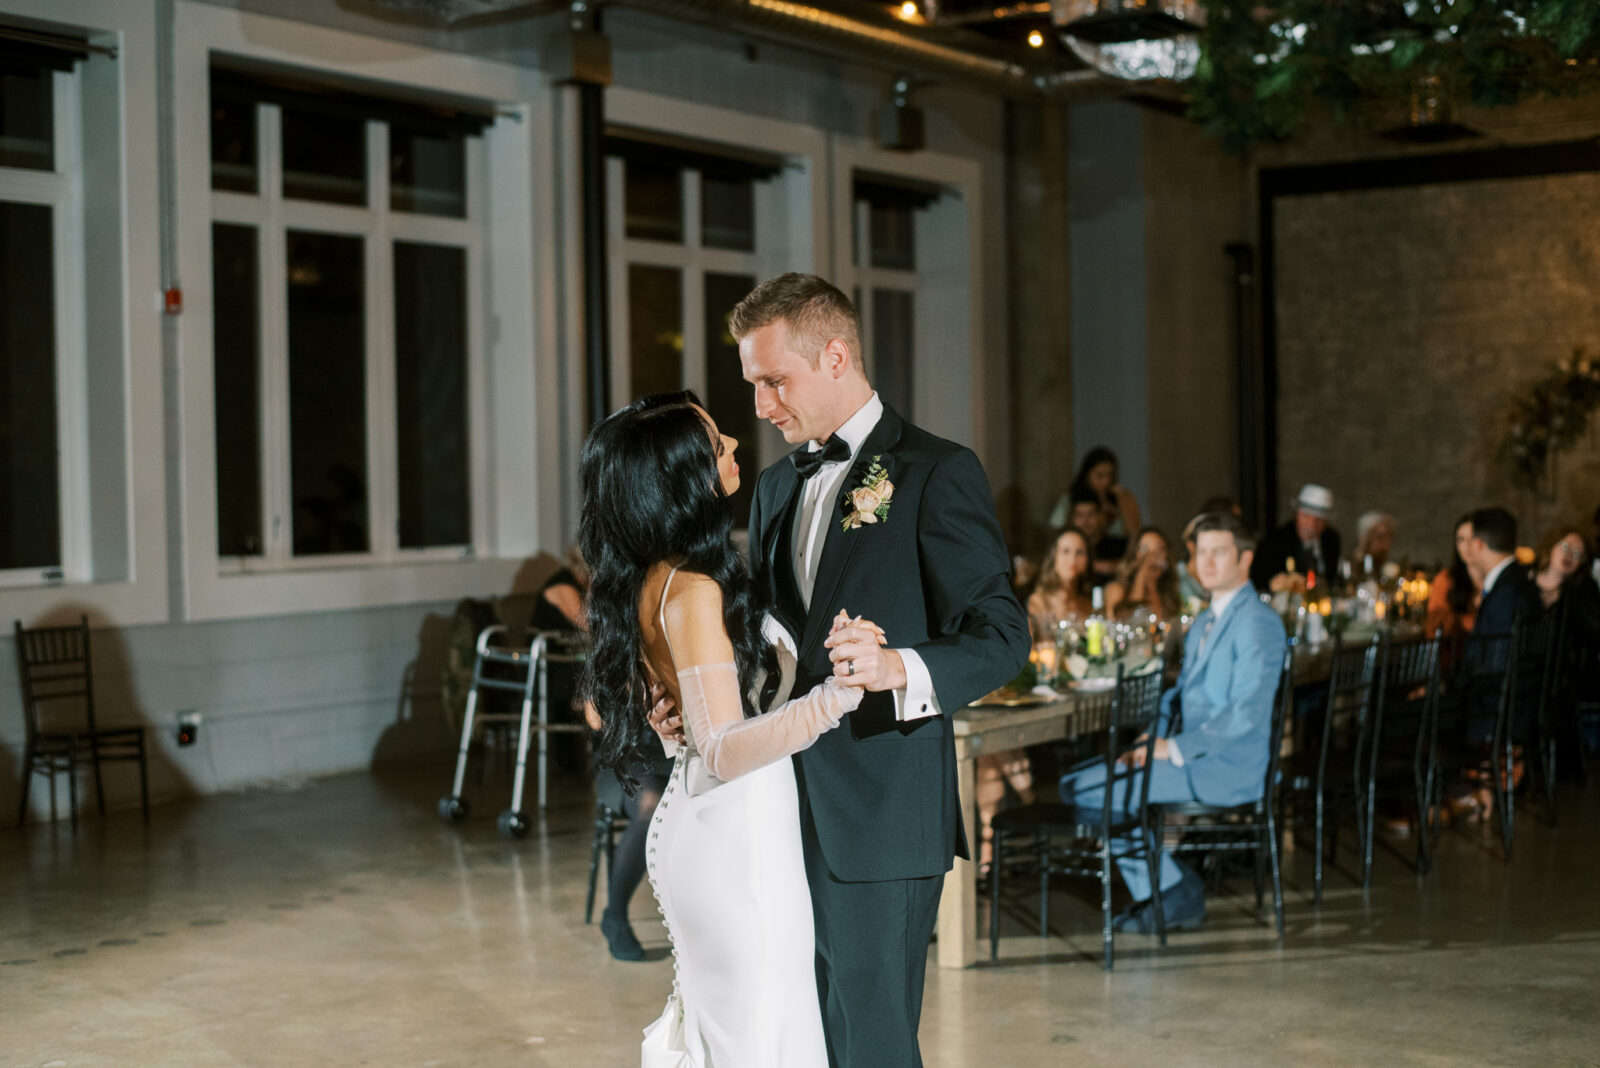 Bride and groom first dance, chic and modern bridal gown featuring sheer sleeves, industrial wedding reception venue in Edmonton, Alberta